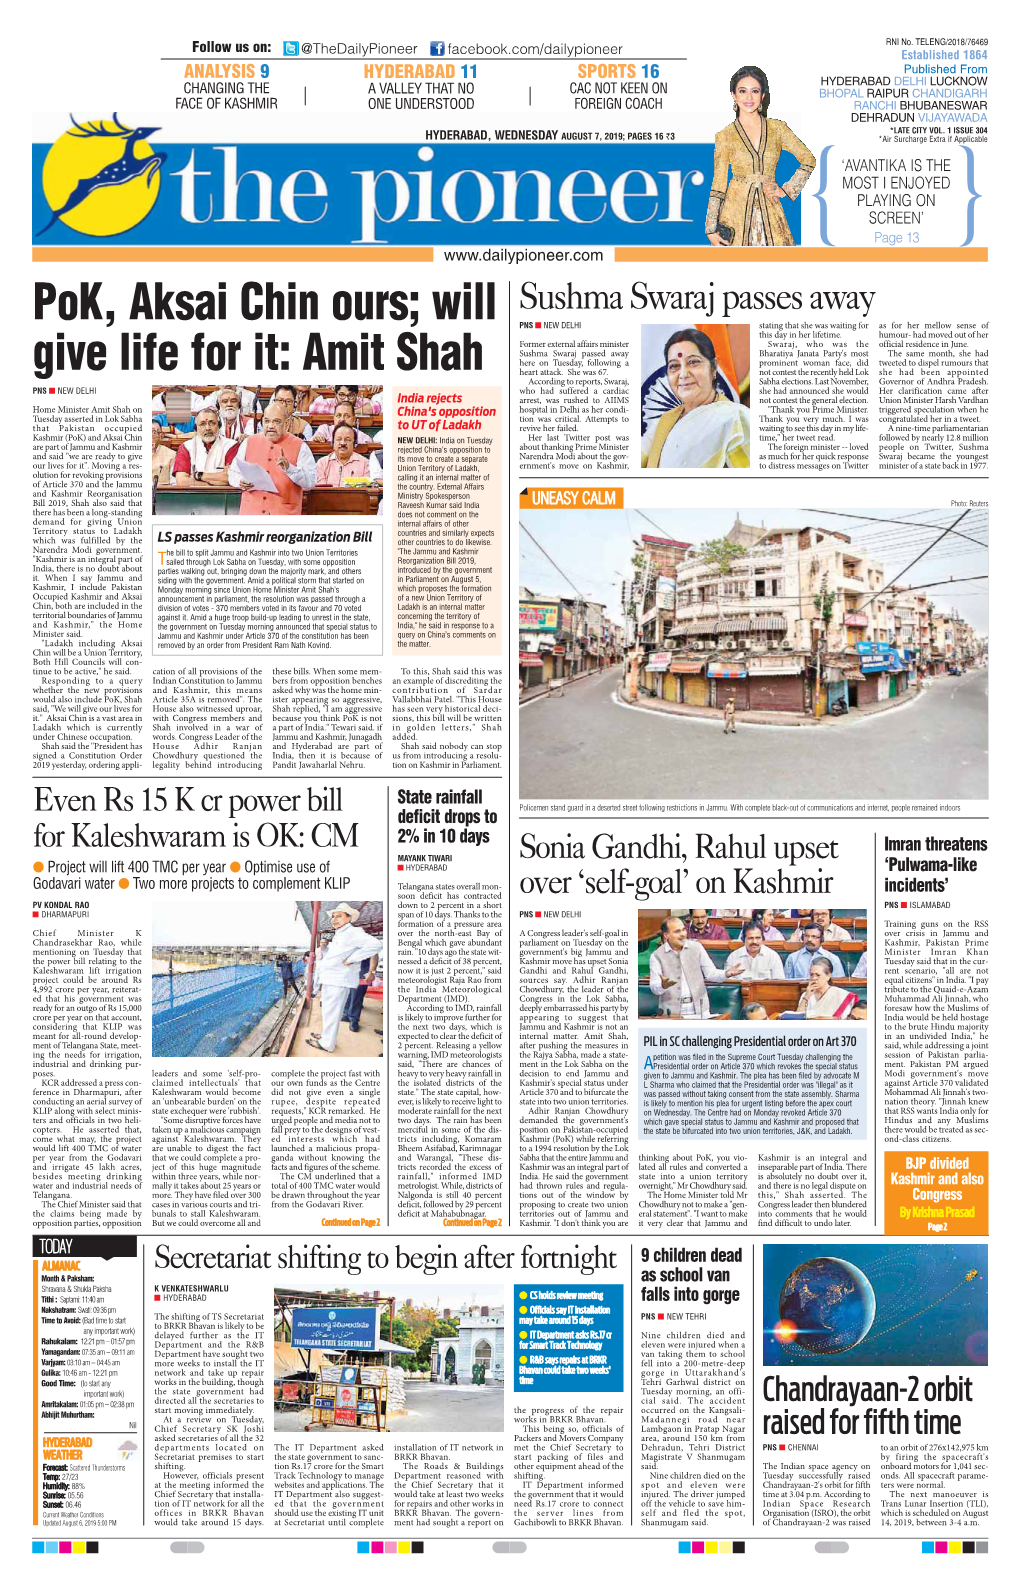 Pok, Aksai Chin Ours; Will Give Life for It: Amit Shah